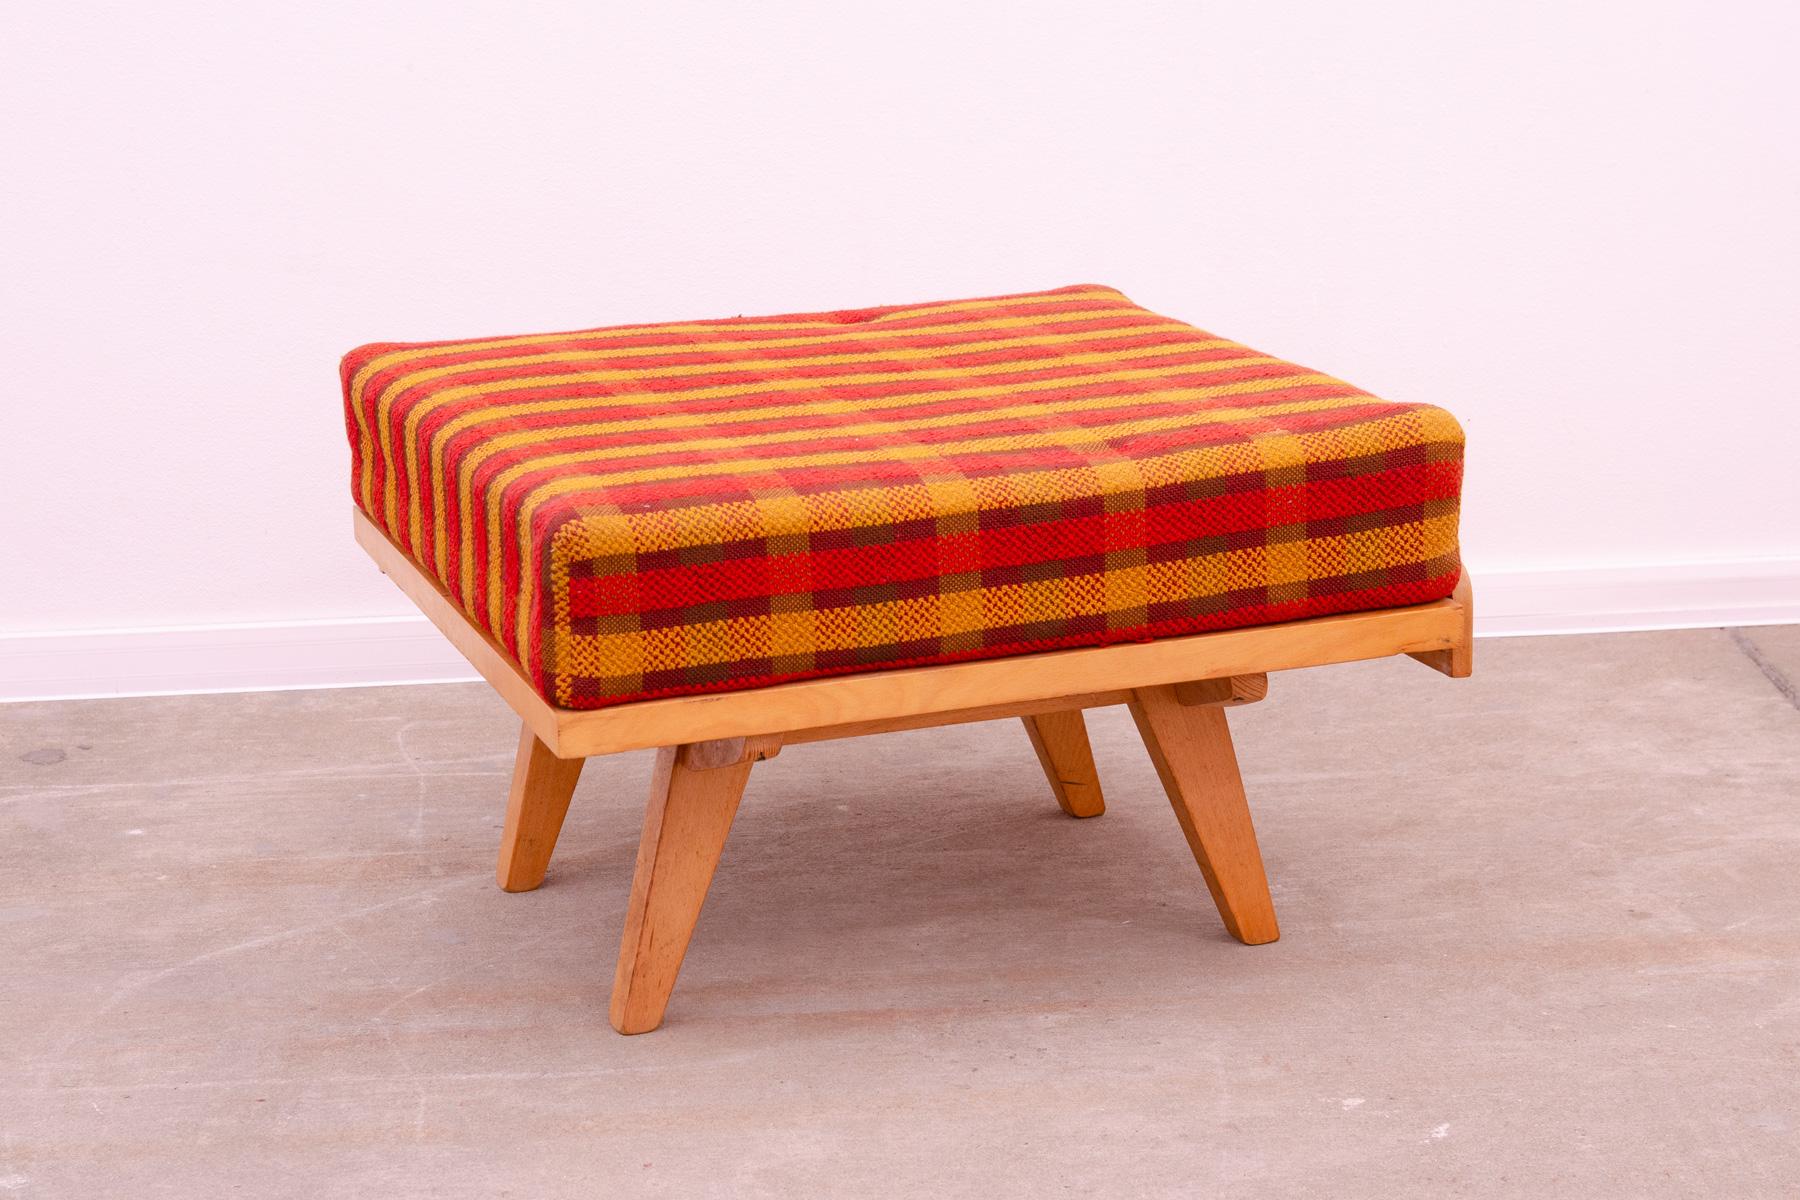 Midcentury footstool designed by Frantisek Jirak for by Tatra nabytok Pravenec, 1960´s. Made in the former Czechoslovakia.
Very stylish and modern design. Overall in good vintage condition, the fabric showing signs of age and using(the fabric has a